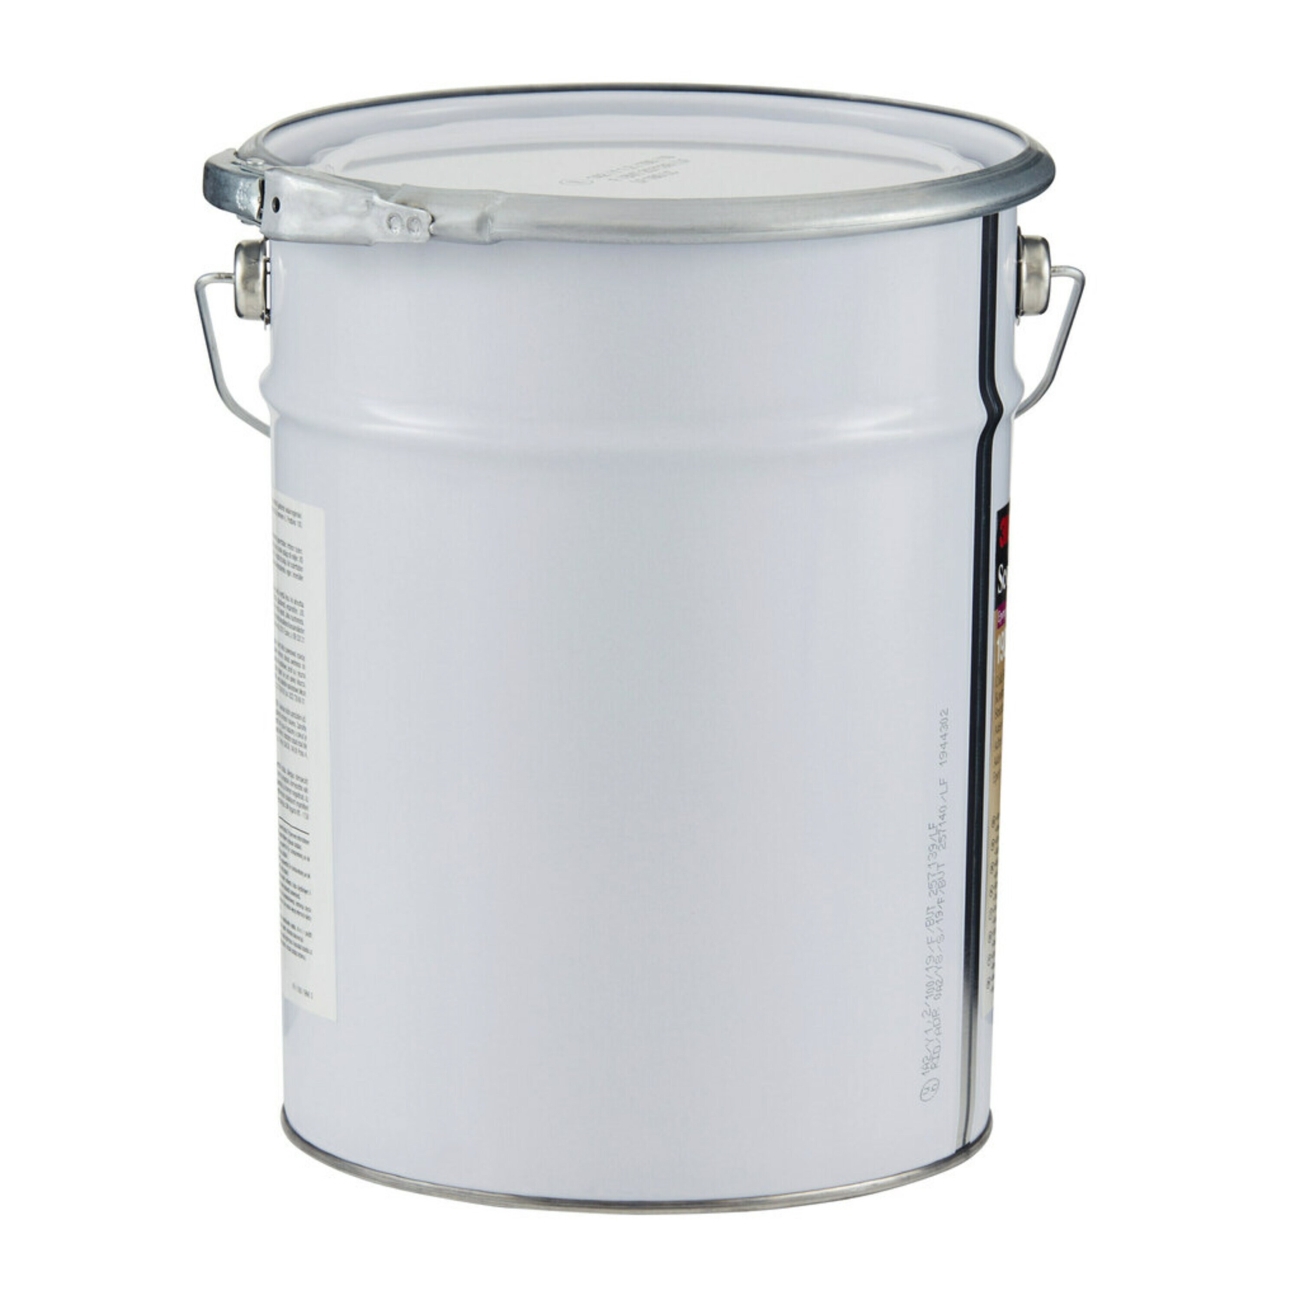 3M Scotch-Weld 2-component construction adhesive based on epoxy resin DP190 Grey, component A, container 18 liters